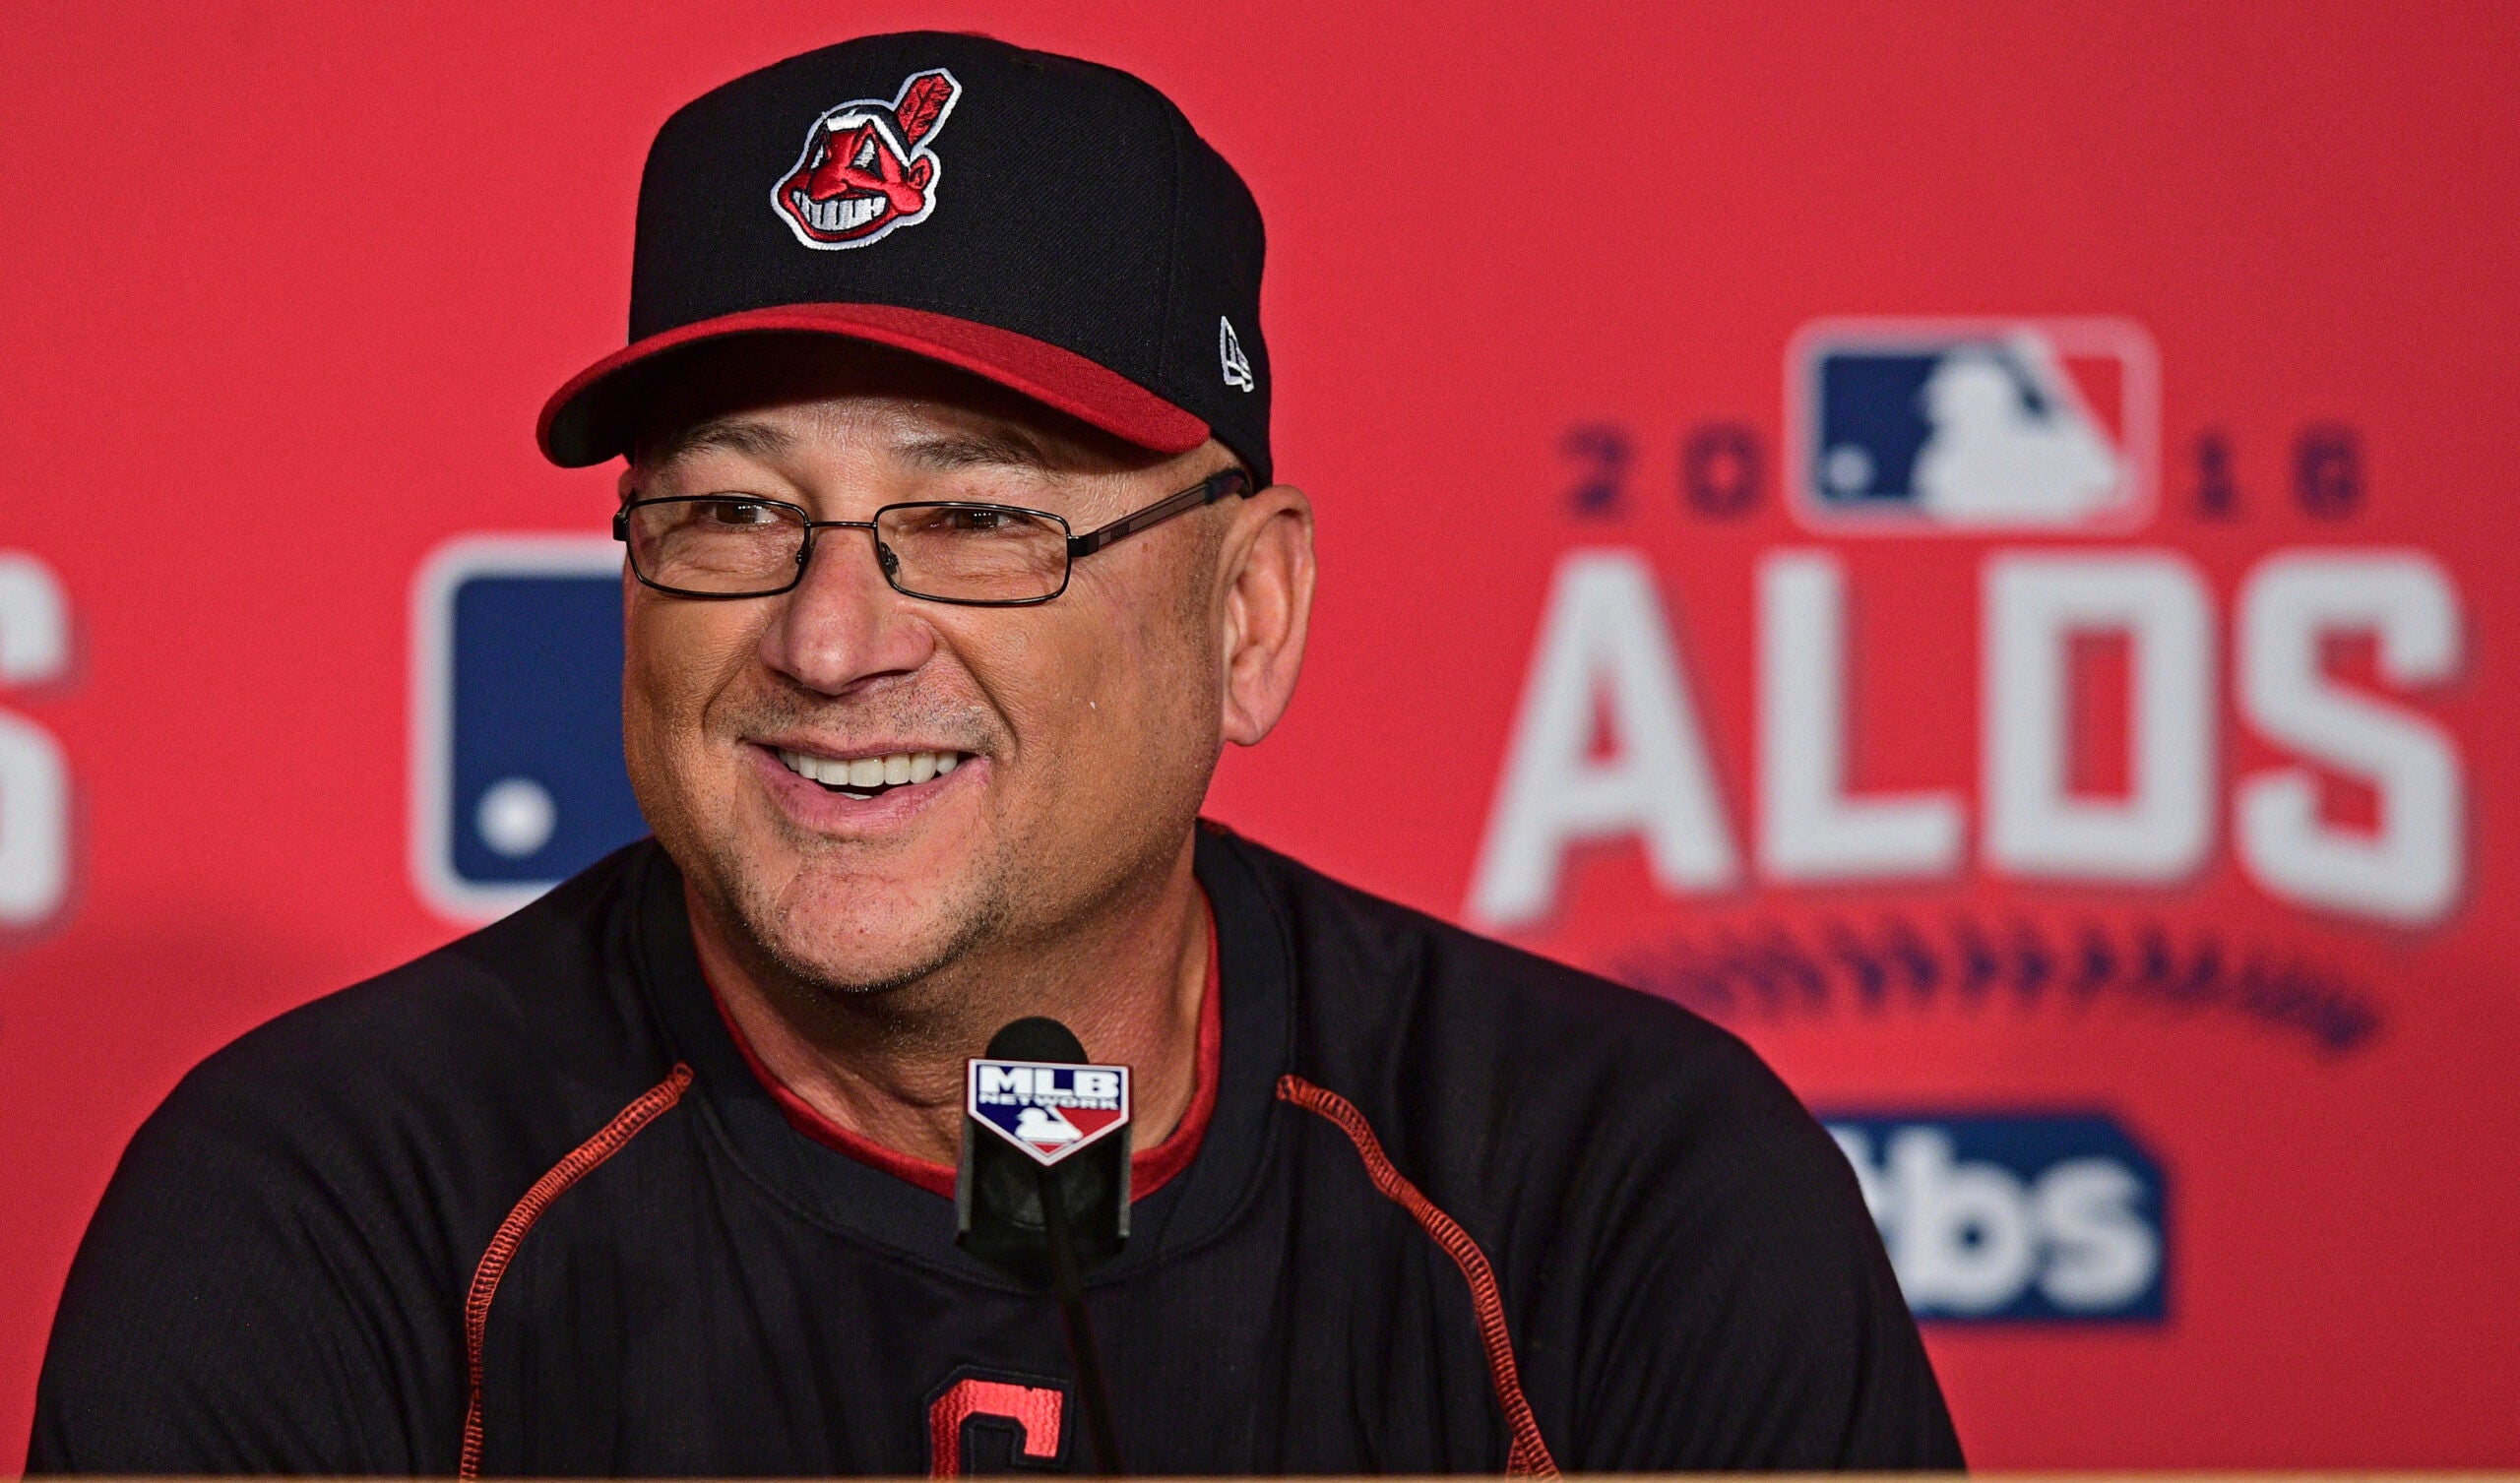 Indians manager Terry Francona has a knack for stories as well as titles